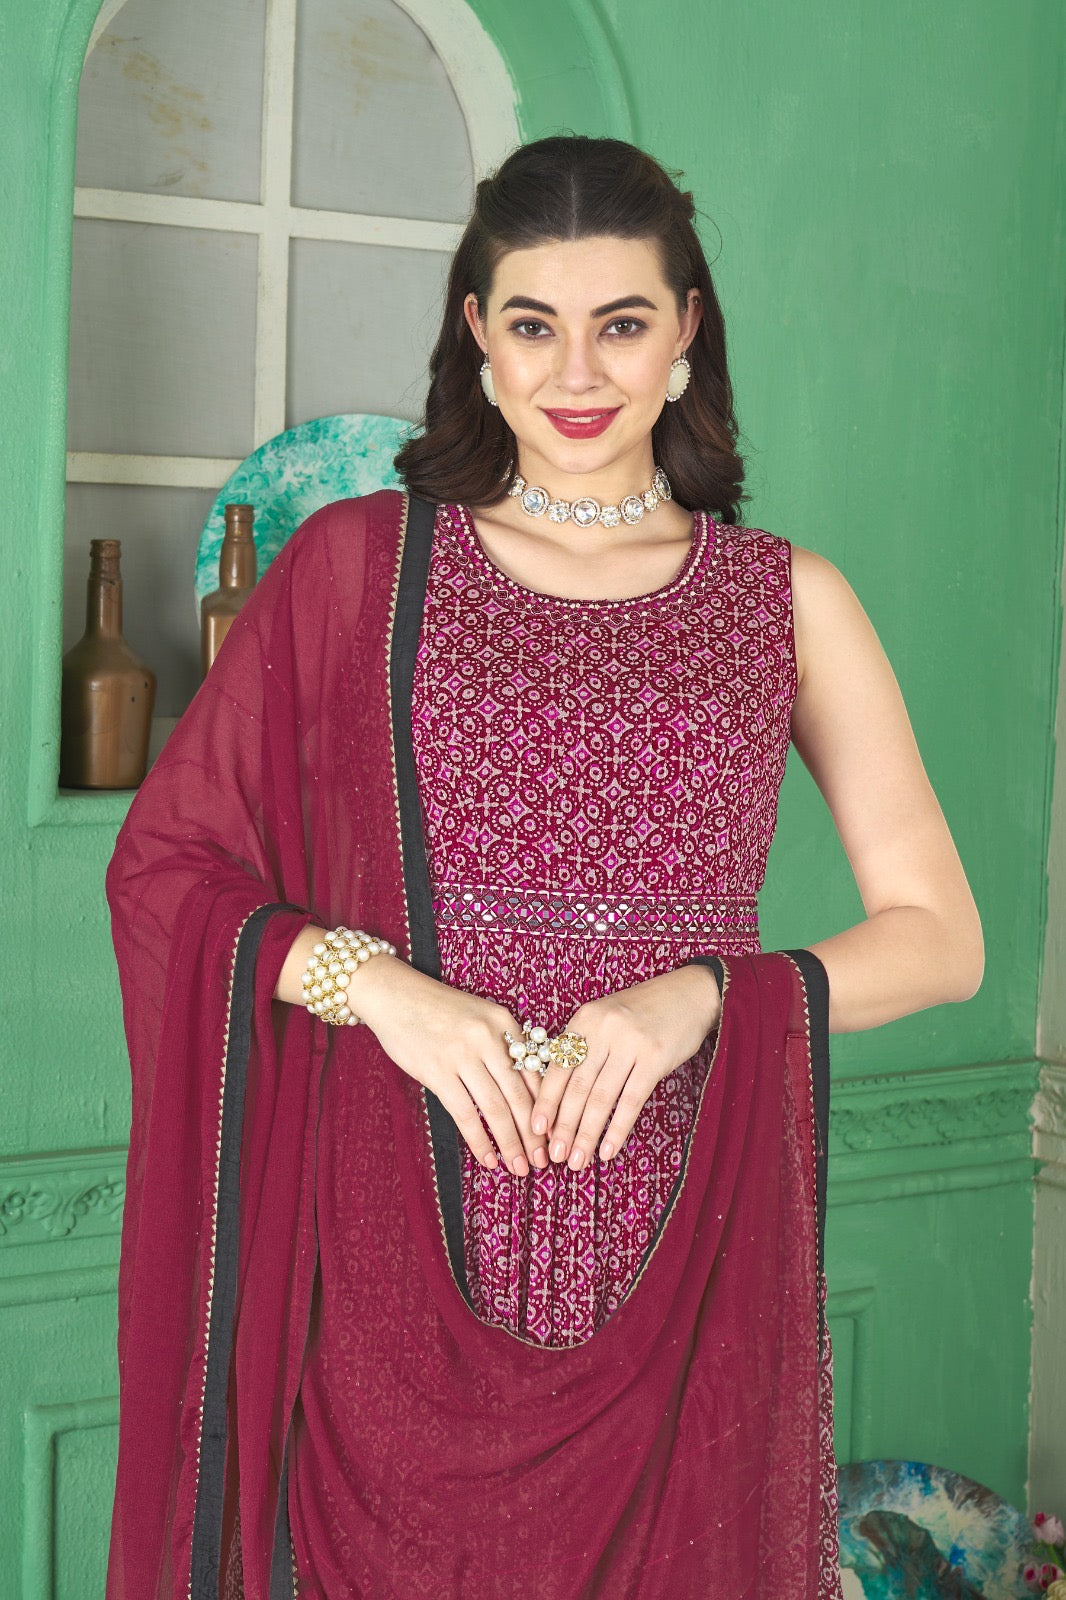 MAROON - PARTY WEAR GOWN WITH NECK LINE HAND WORK & DUPATTA